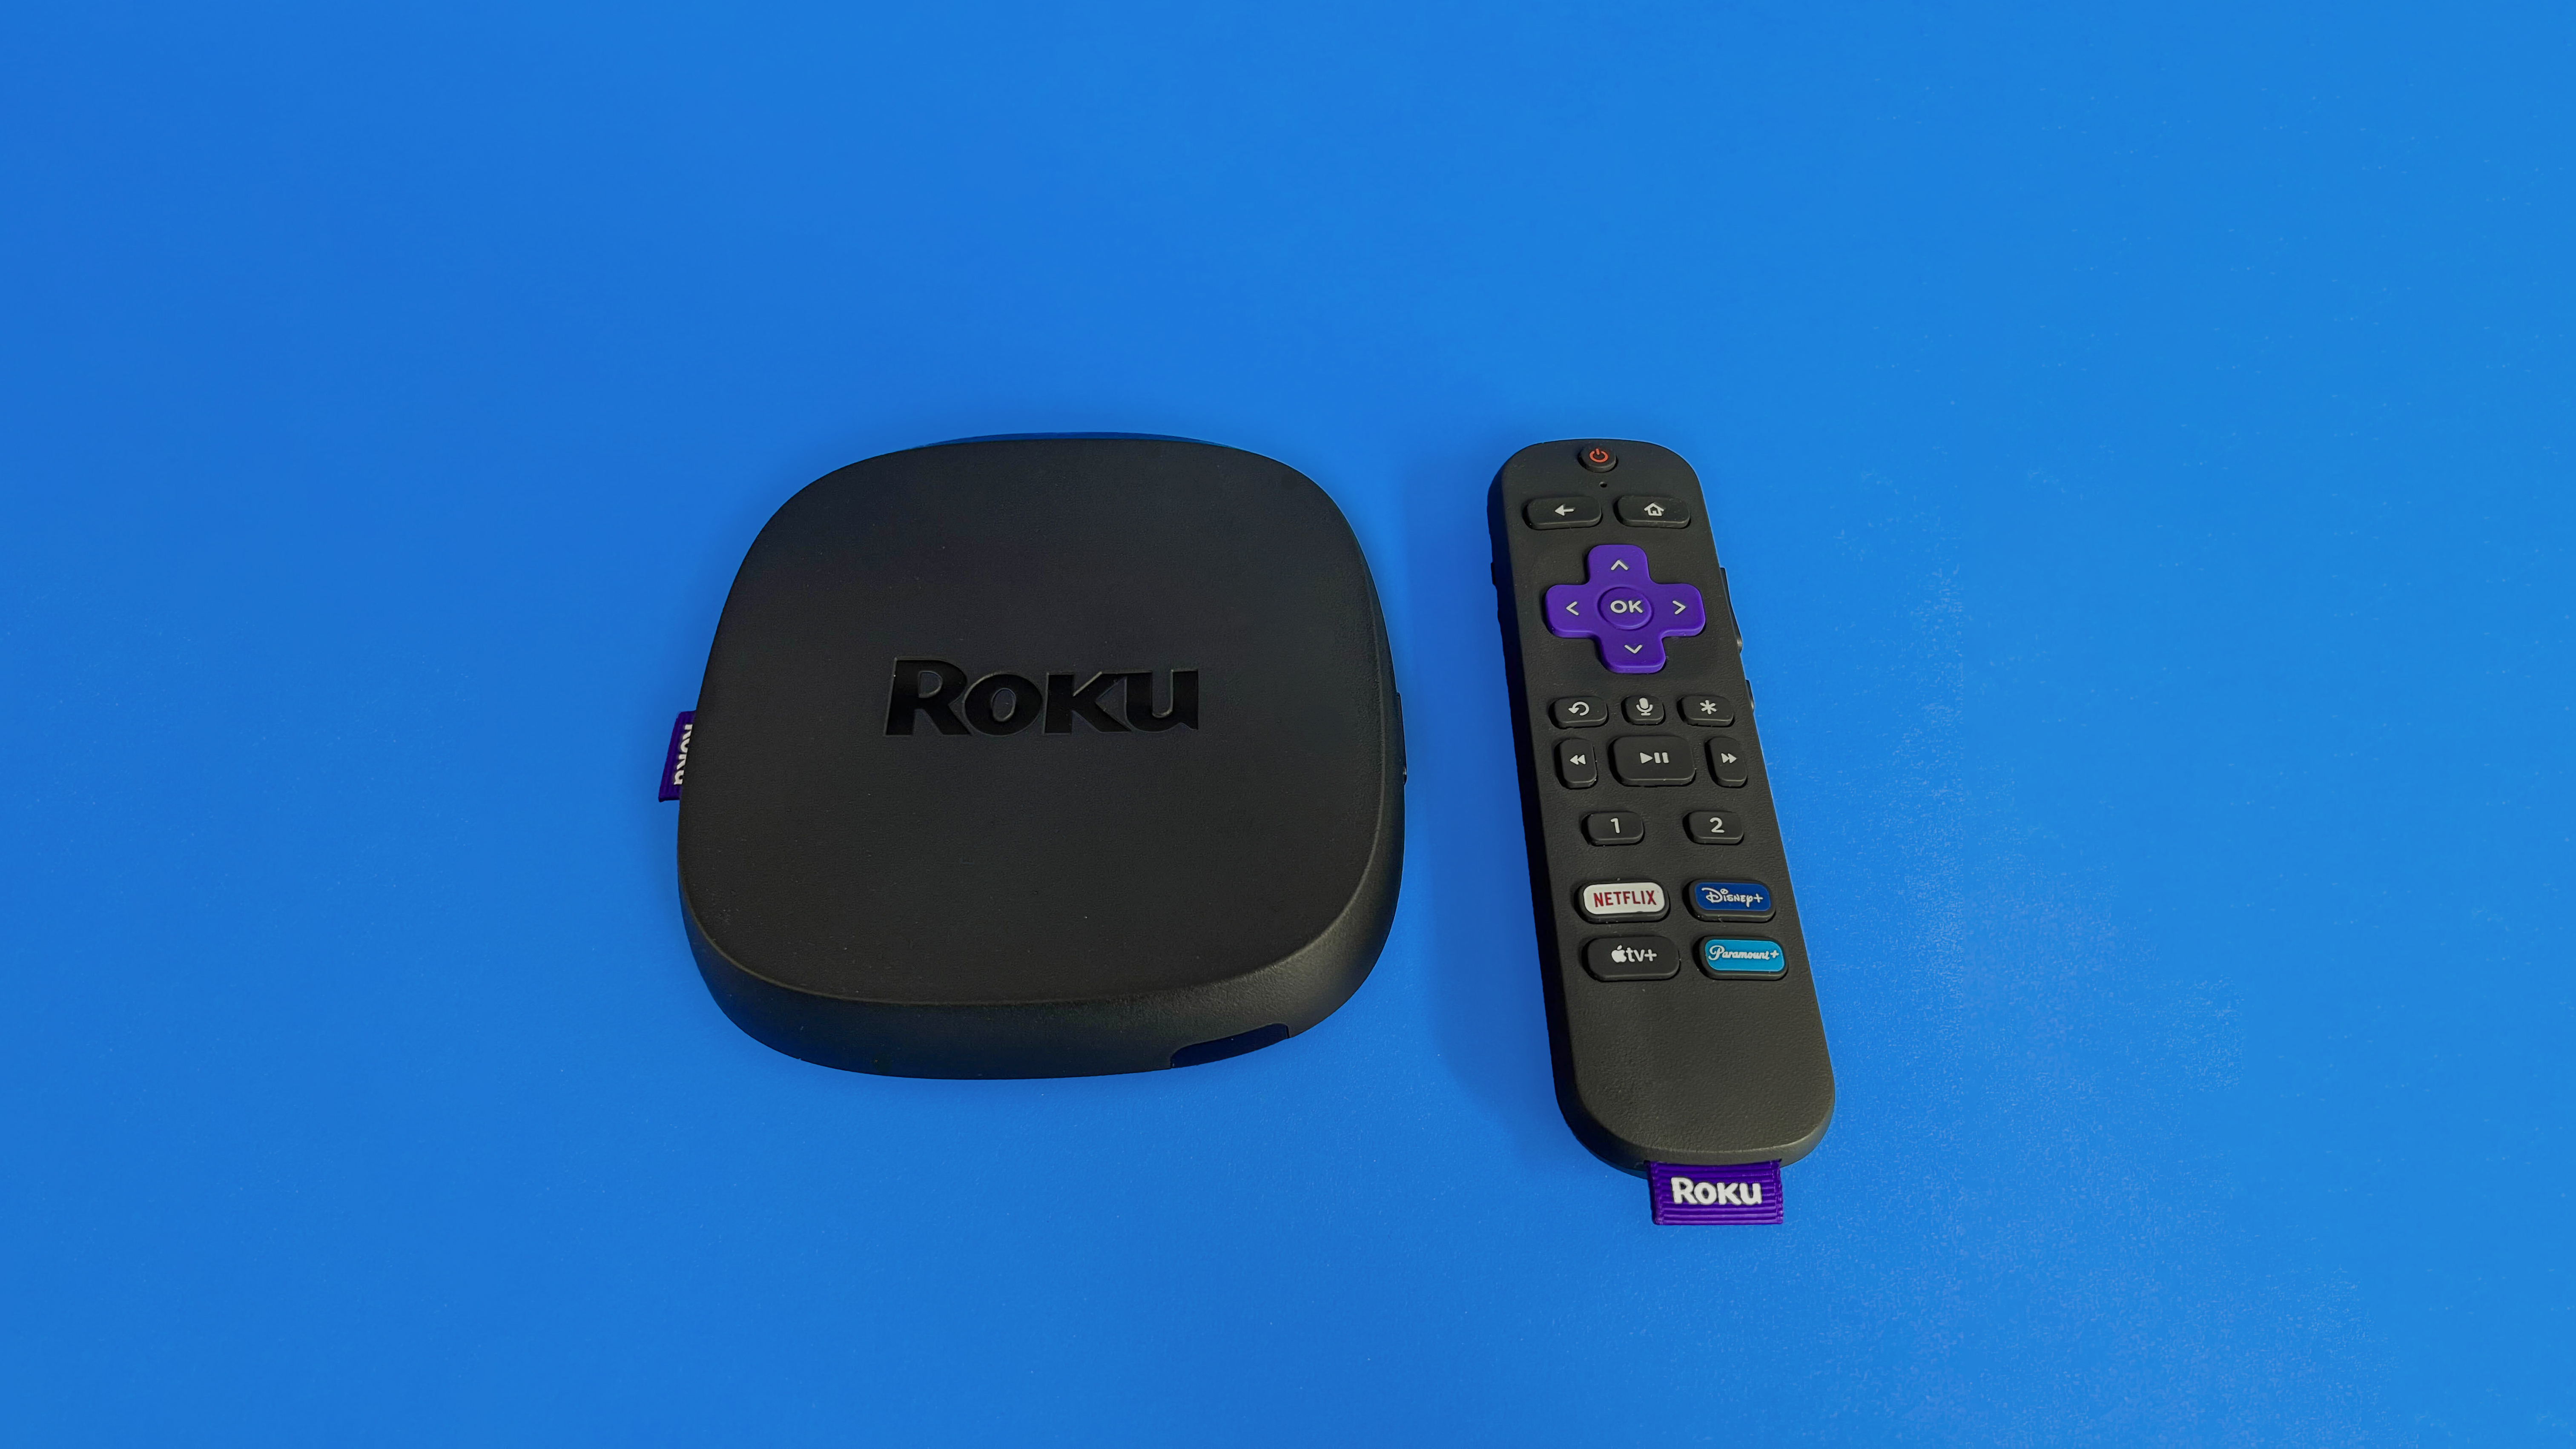 Apple TV 4K review: A slightly better box with a greatly improved remote